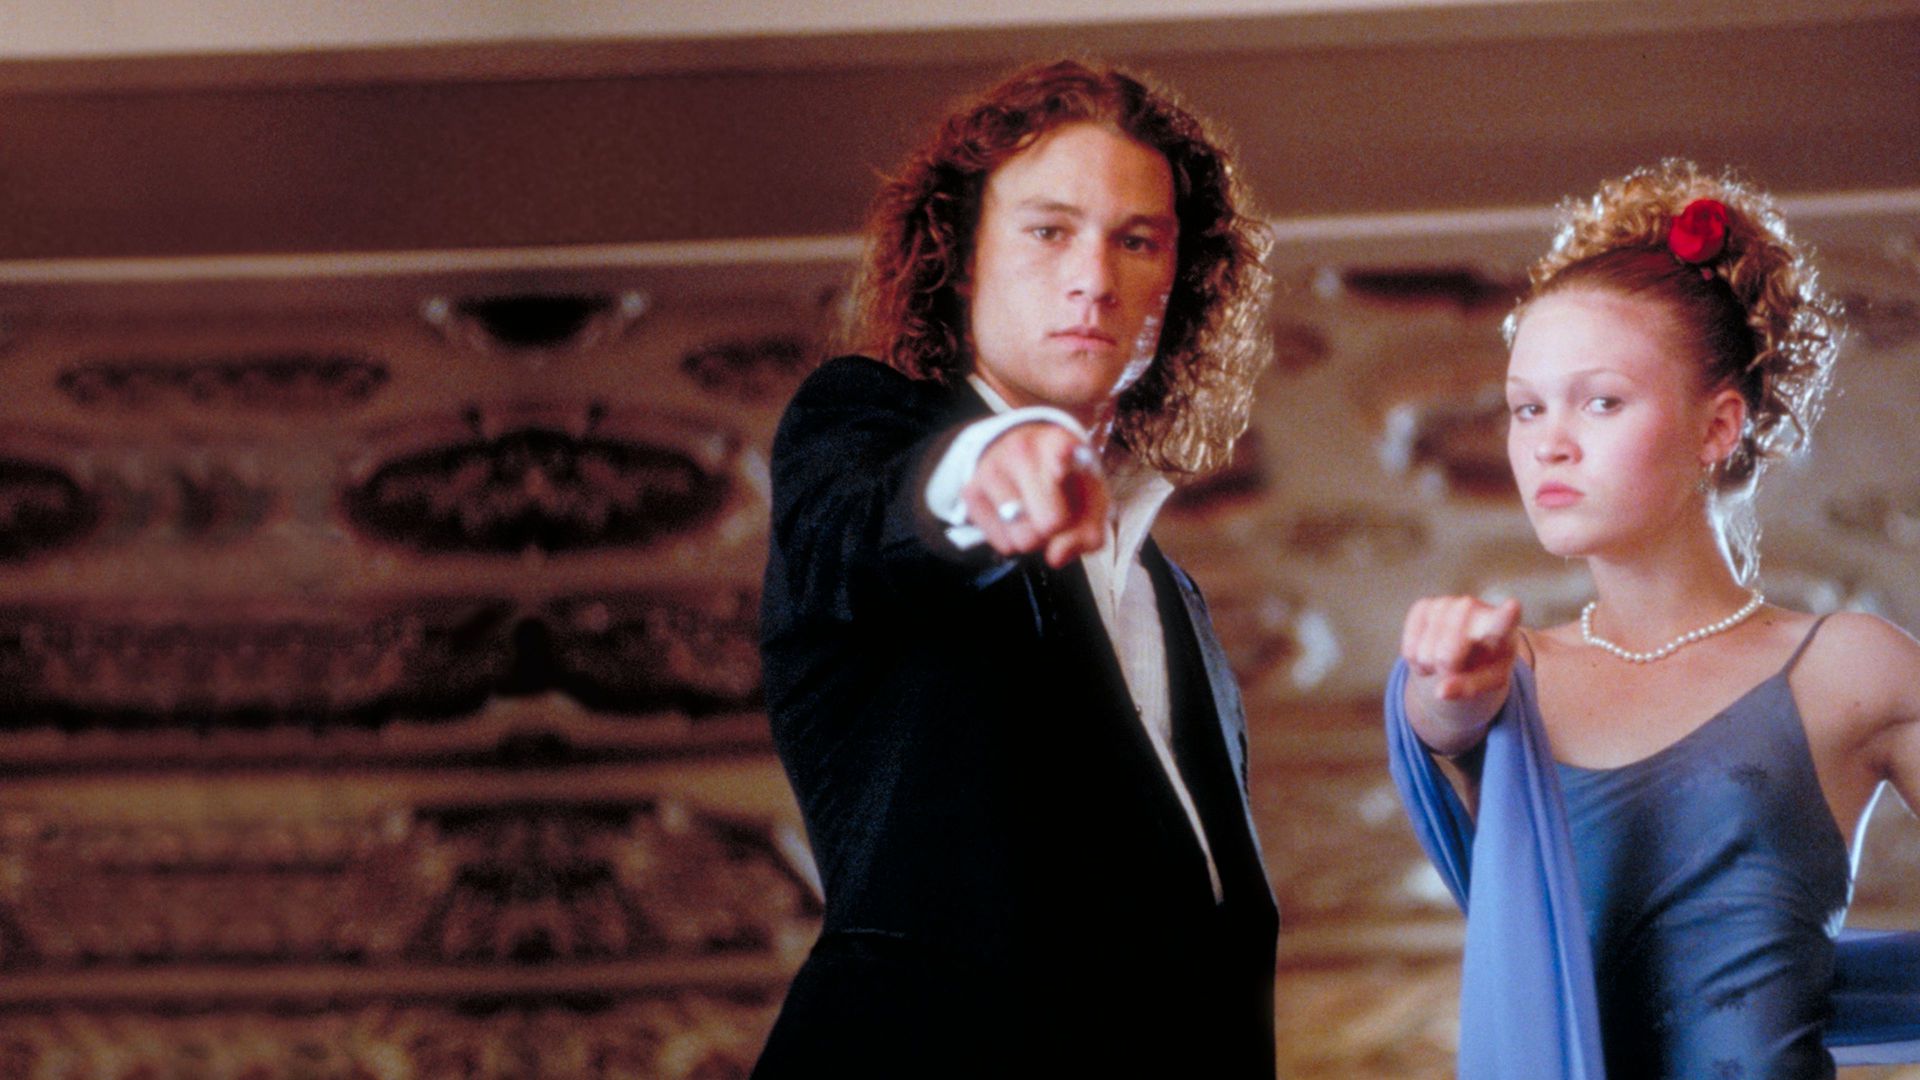 10 Things I Hate About You best comedies on Disney Plus - movies leaving hulu